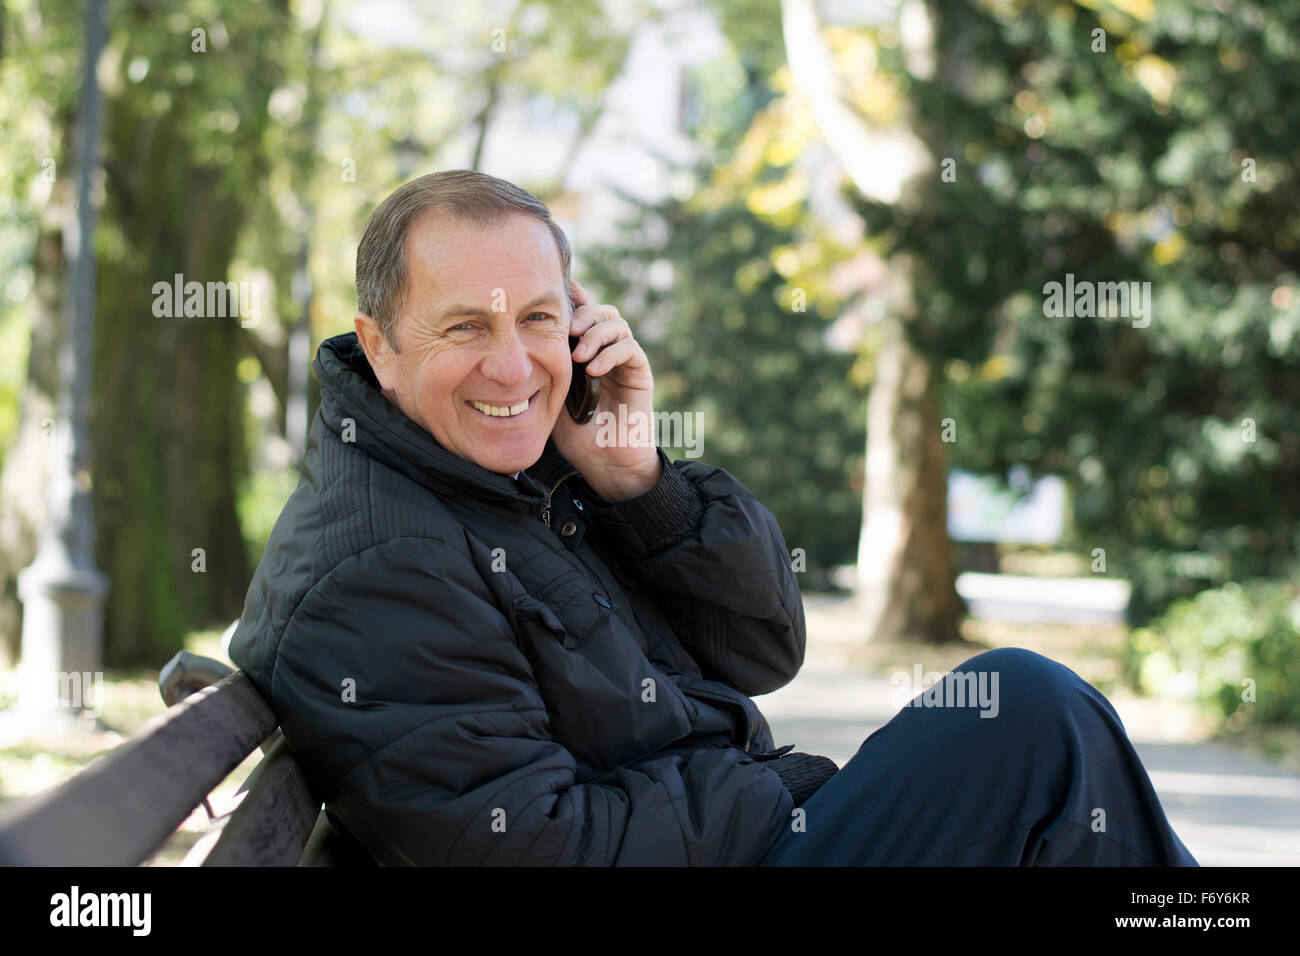 Middle aged man using new technology device in park Stock Photo